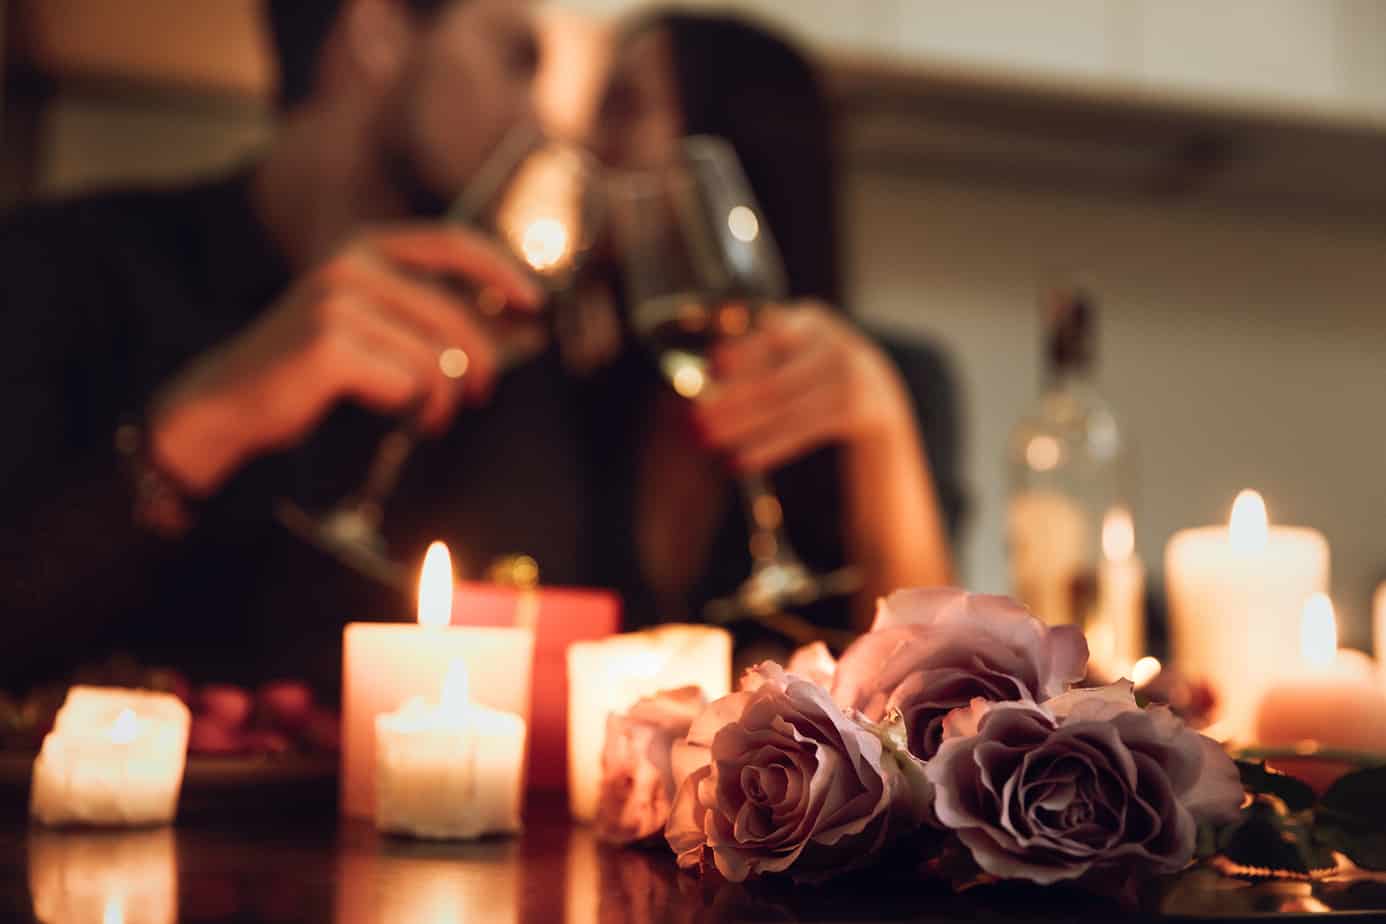 Close up of flowers on a table next to candles. In the background, a couple kisses while clinking glasses.